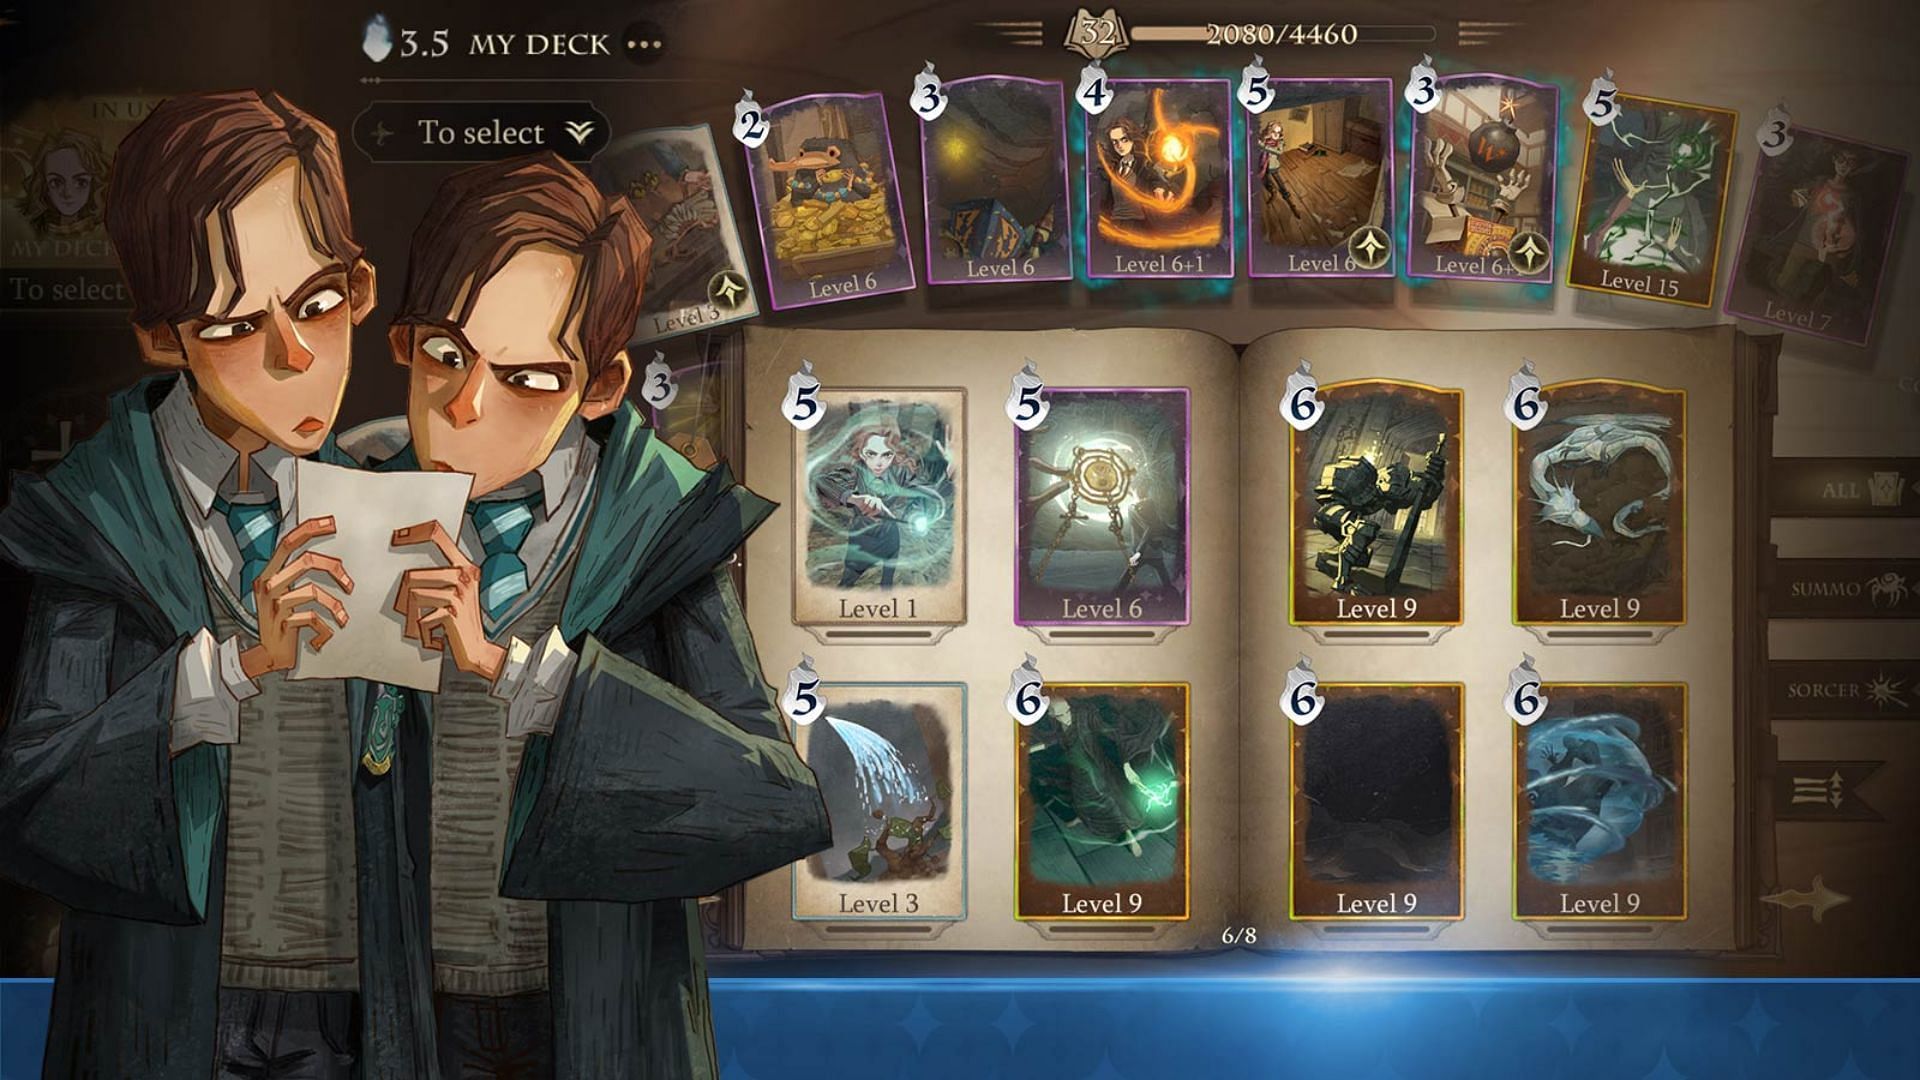 Companion cards can summon one of the character from Harry Potter franchise to aid you during battle (Image via Harry Potter Magic Awakened)